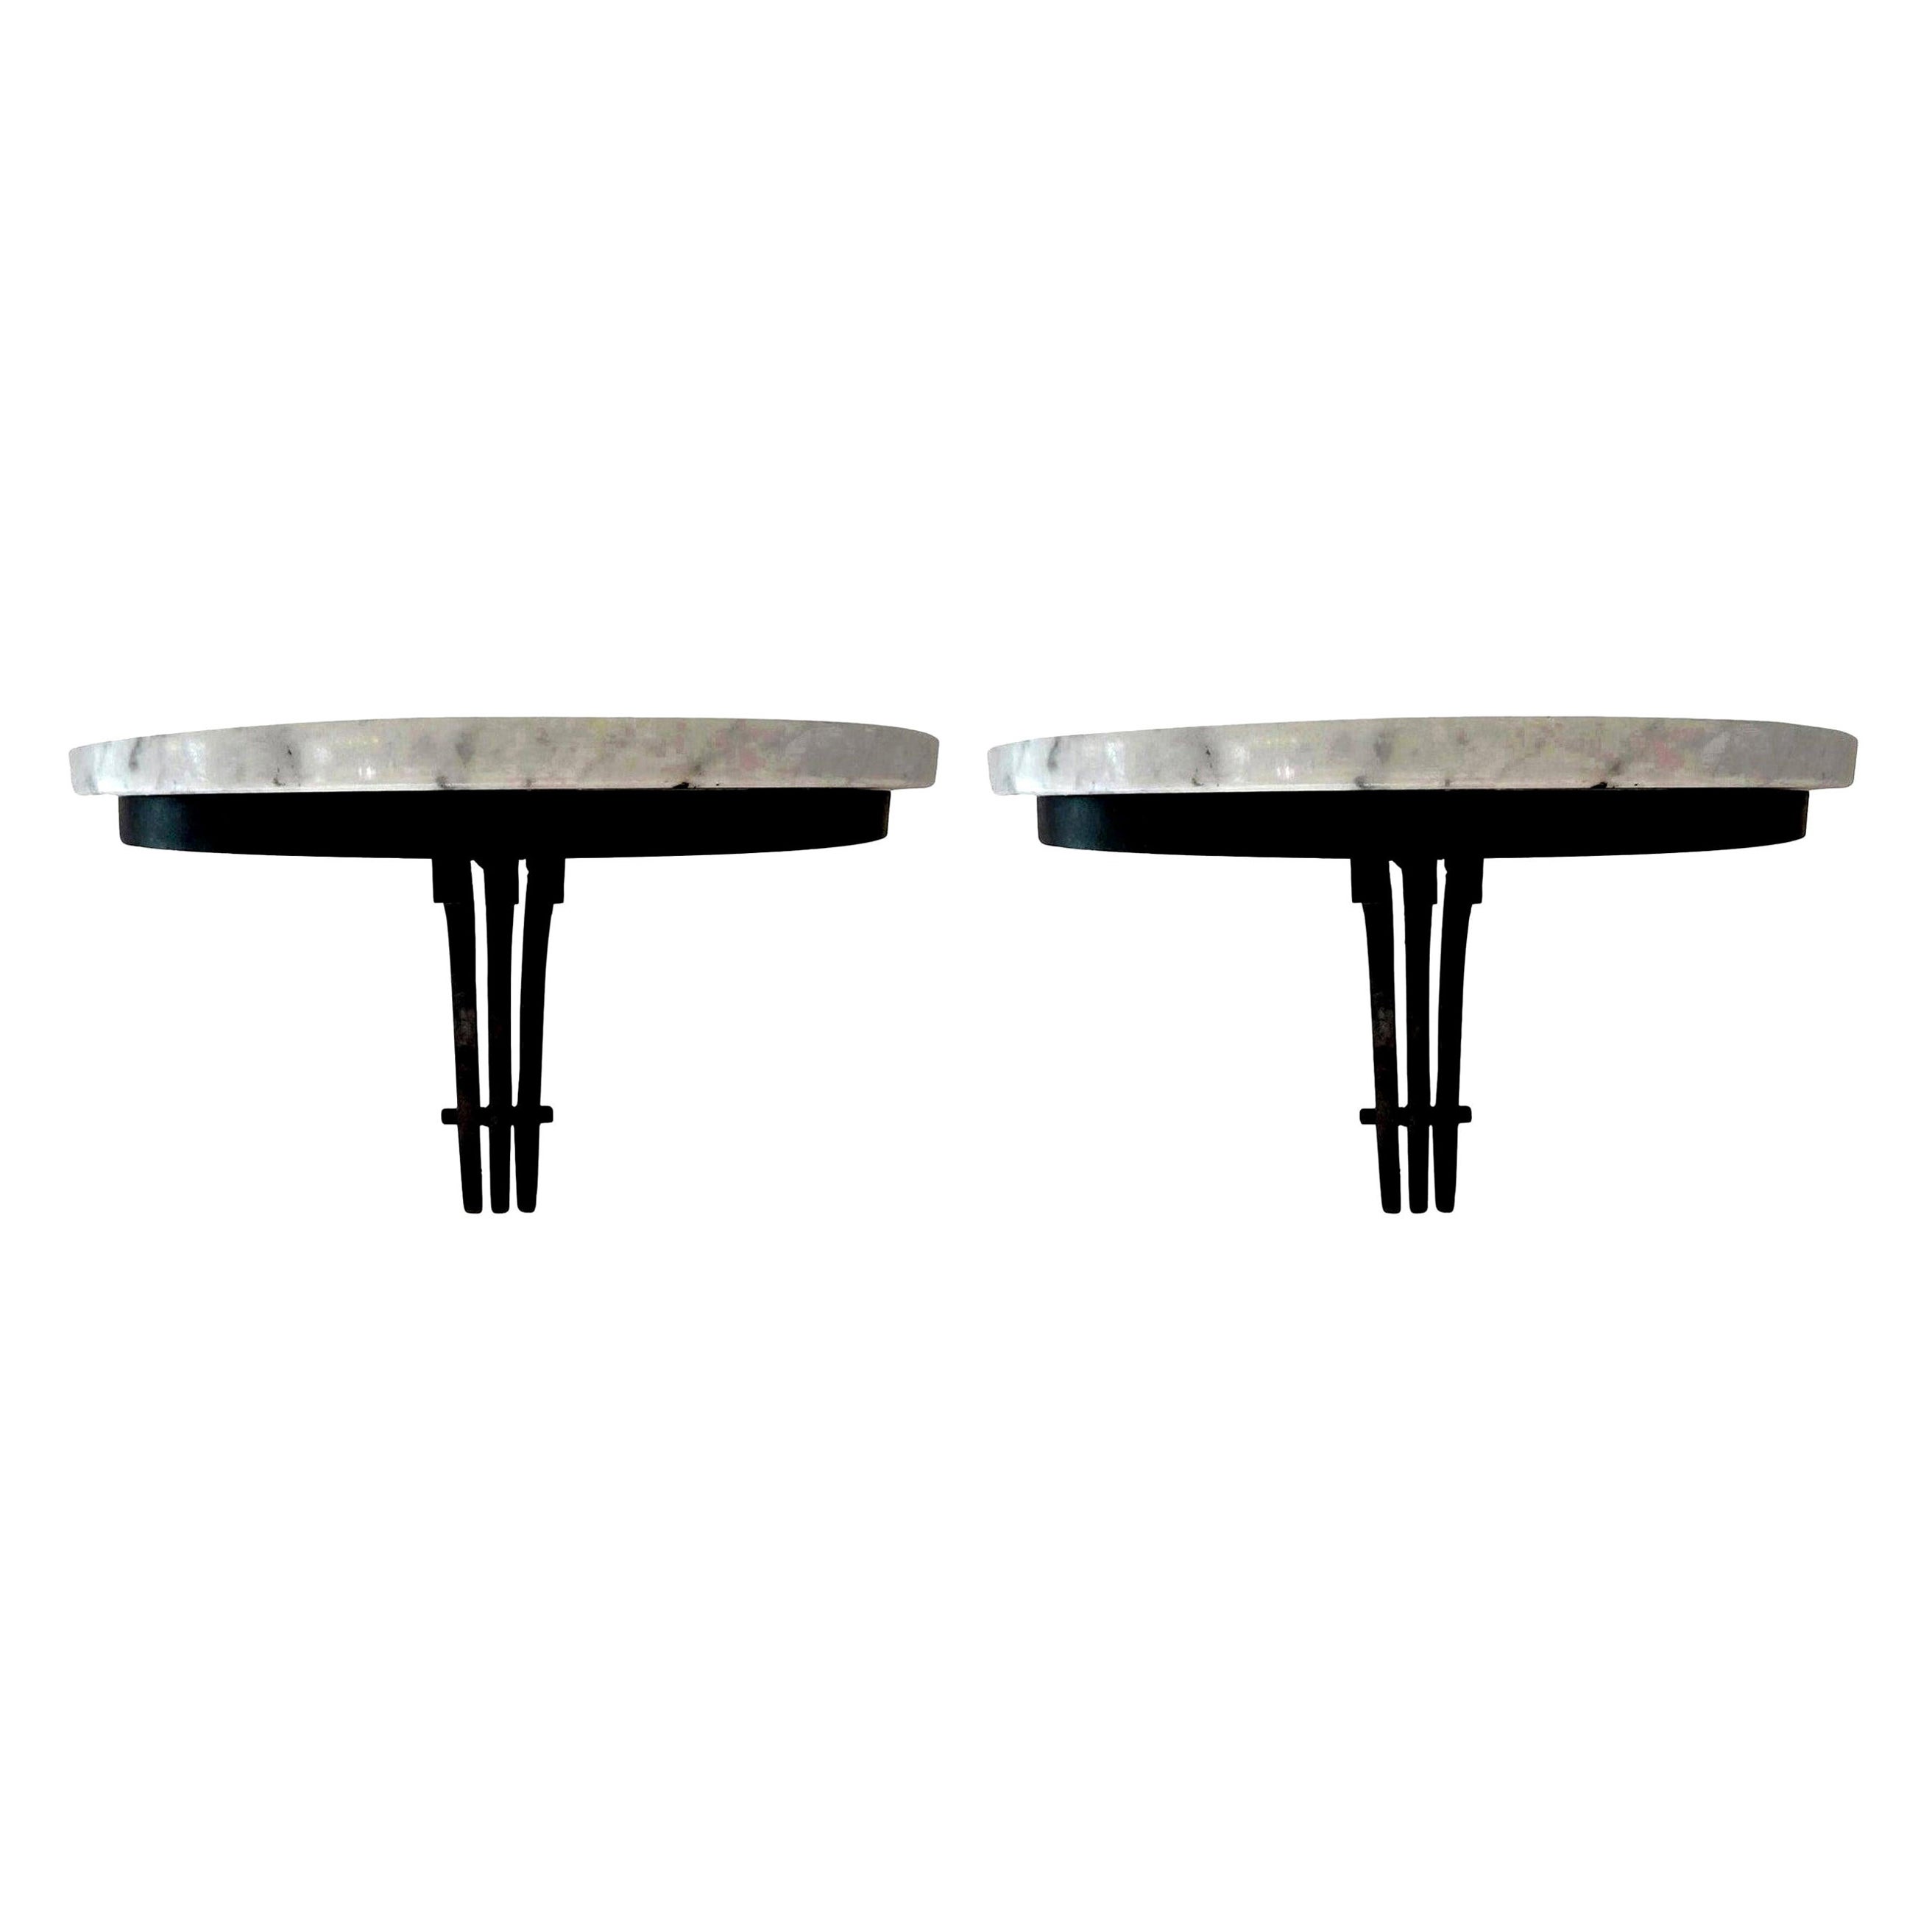 Pair of French Art Deco Wrought Iron Wall Brackets or Consoles with Marble Tops